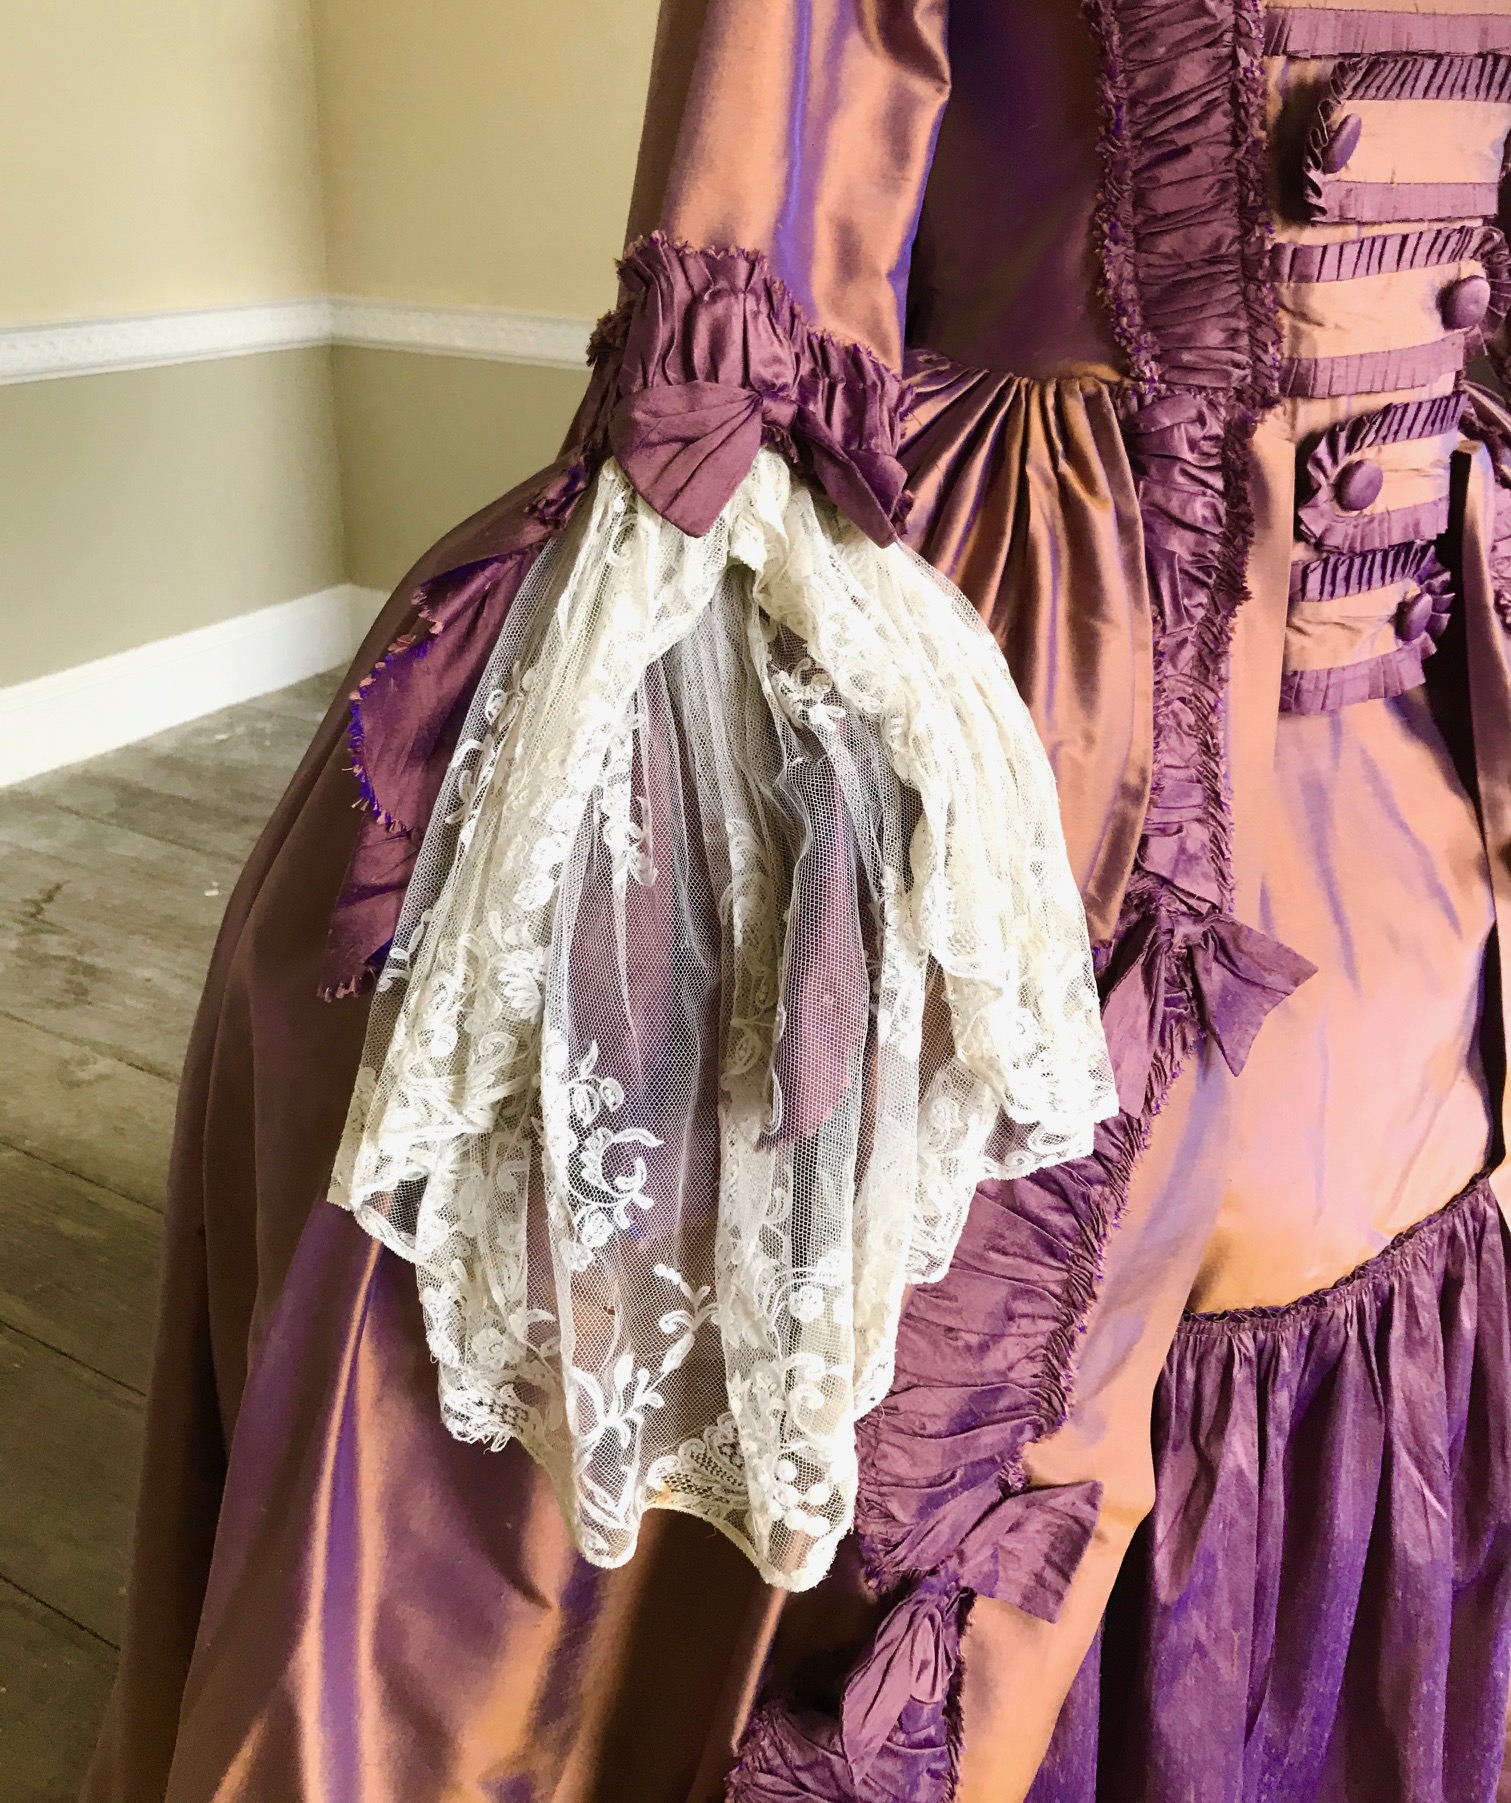 An exceptional lady's 18th century style sack dress, bronze and purple with fine lace cuffs - with skirt and pannier frame. Ex London Festival Opera 'The Magic Flute'.